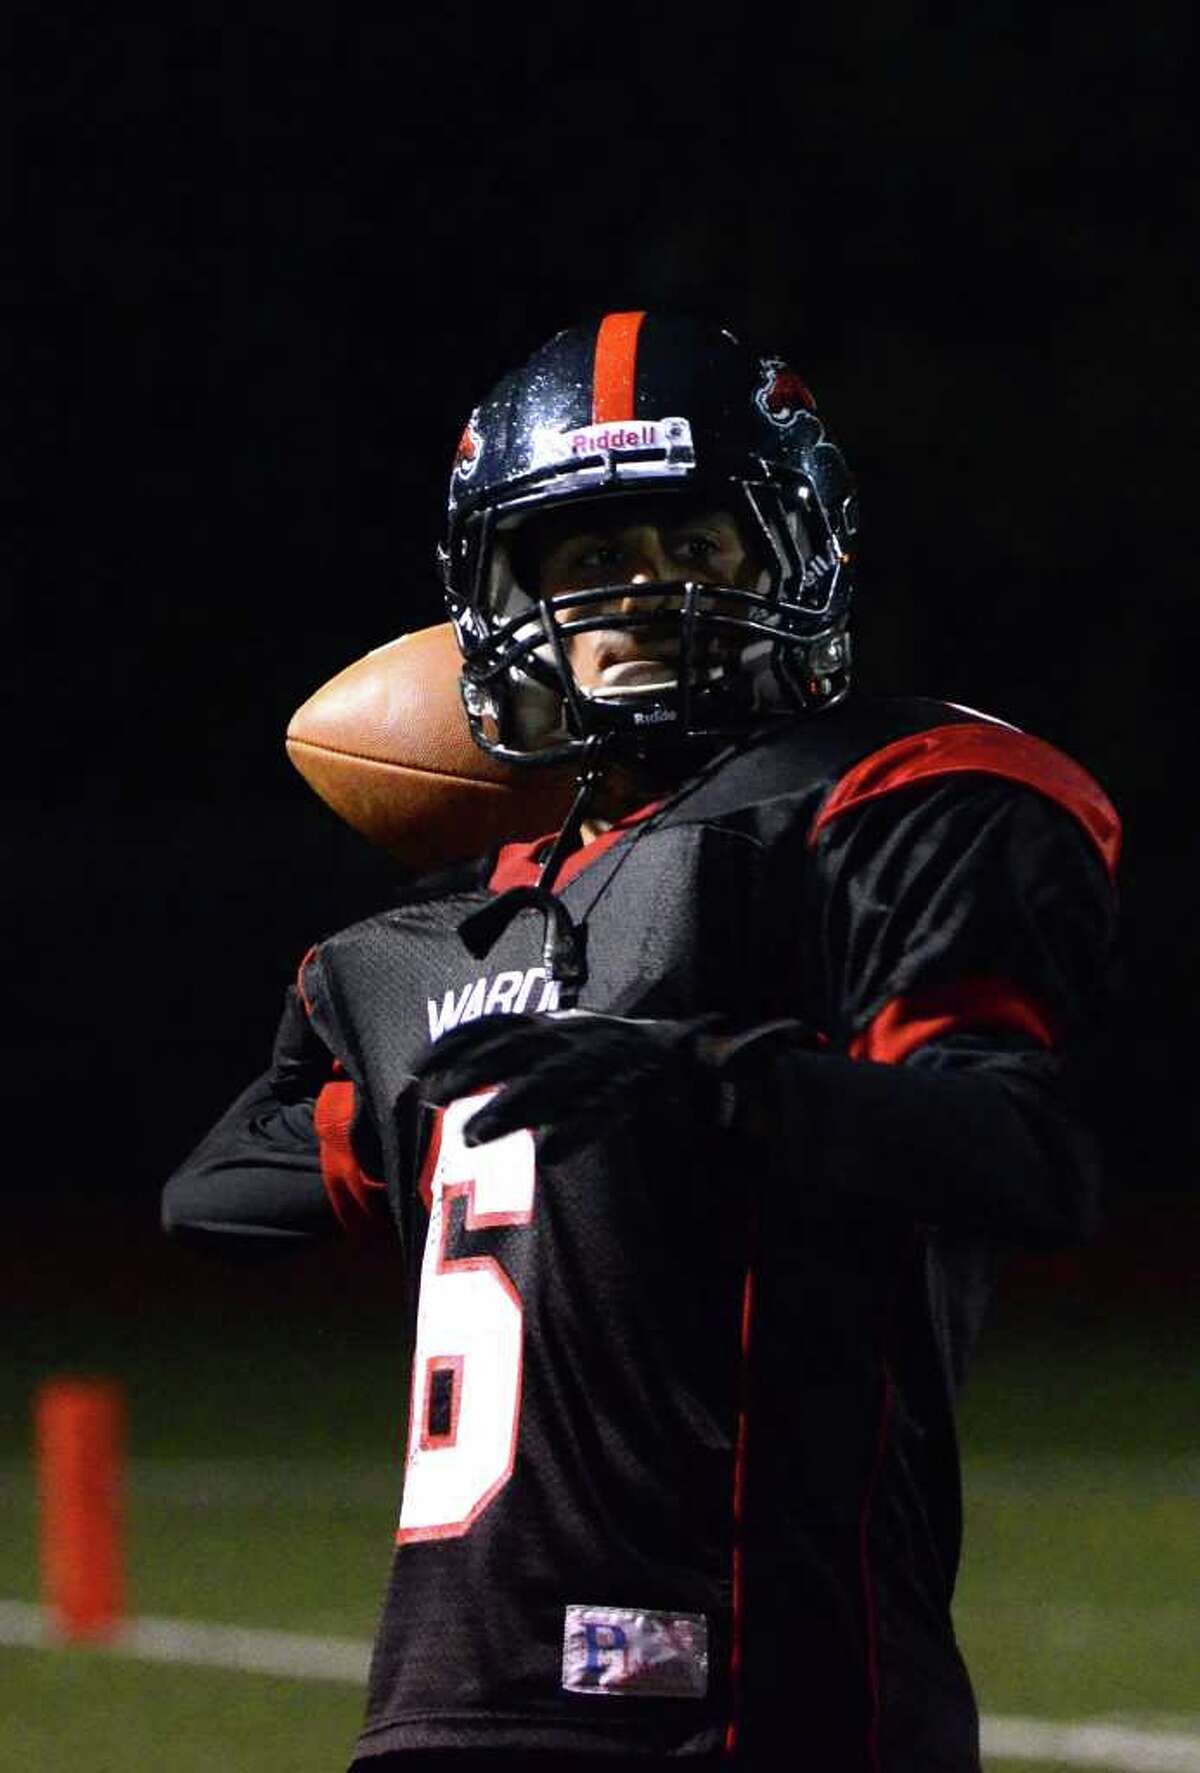 Fairfield Warde's Anthony Miller (6) warms up the quarterback during the football game against Darien at Fairfield Warde High School on Friday, Sept. 23, 2011.